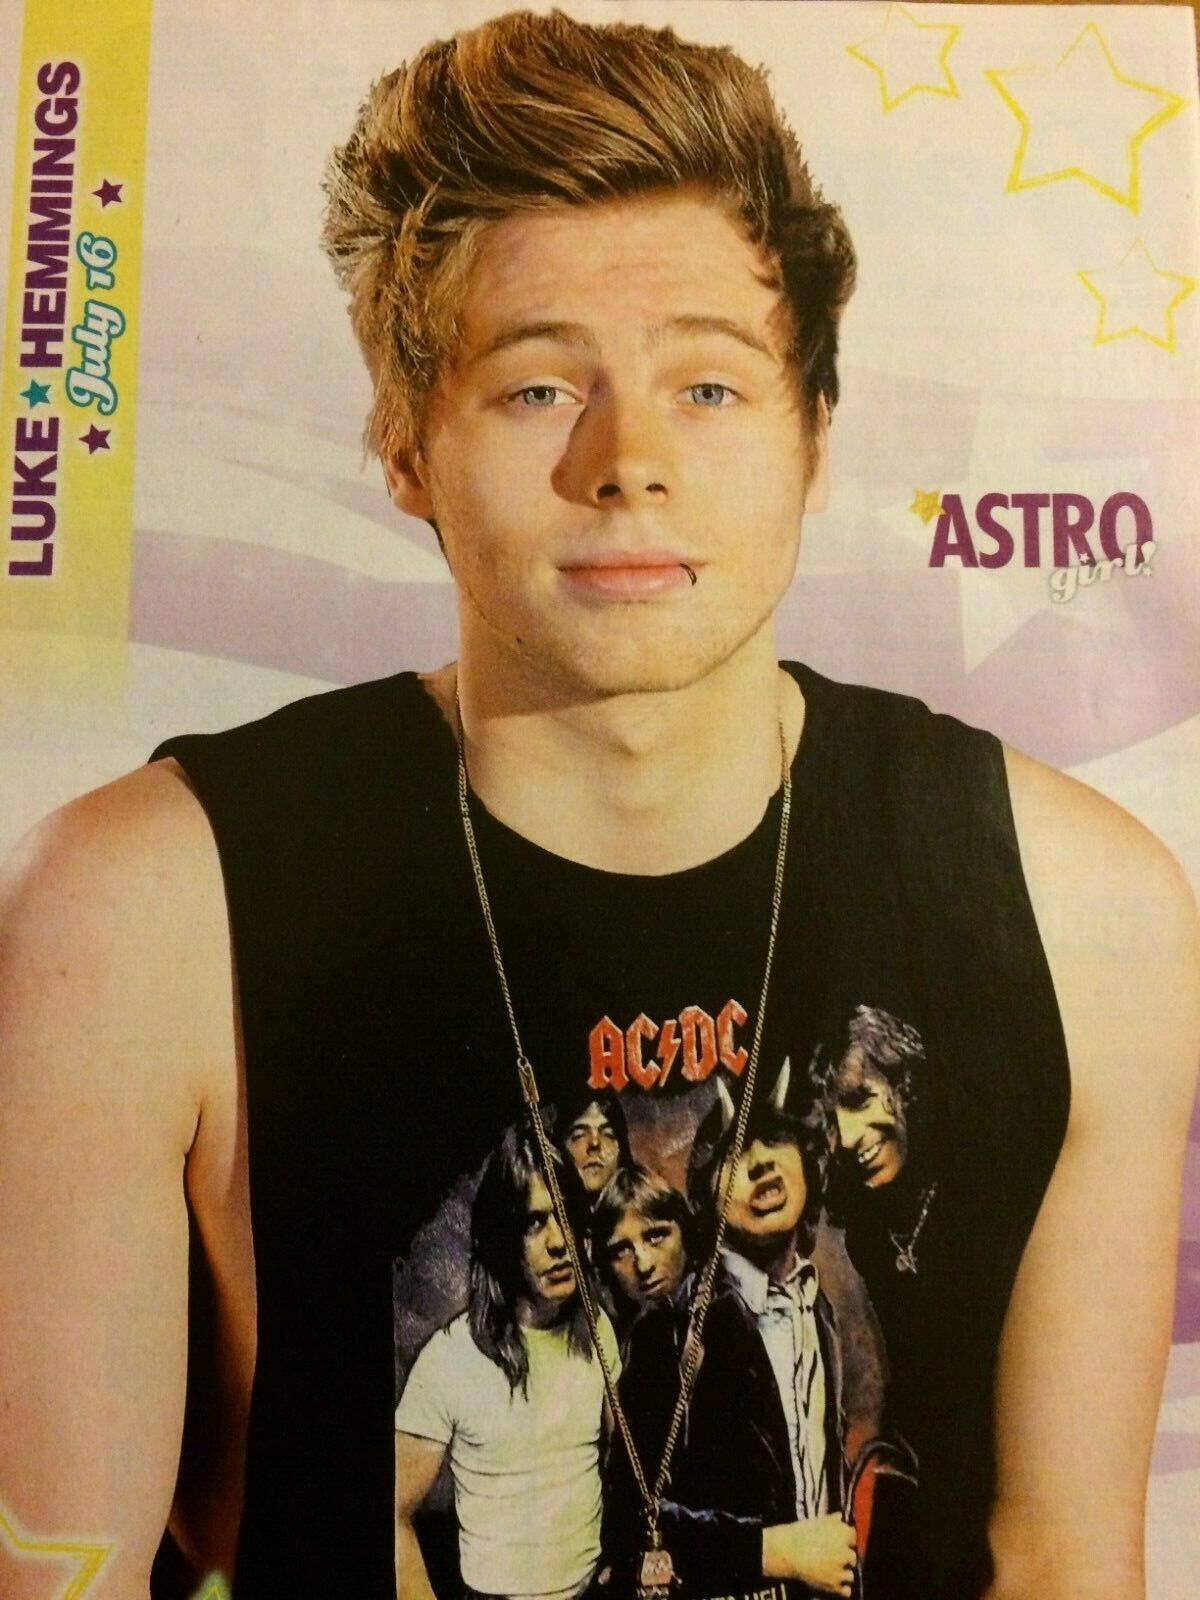 5 Seconds of Summer, Luke Hemmings, Full Page Pinup, Five